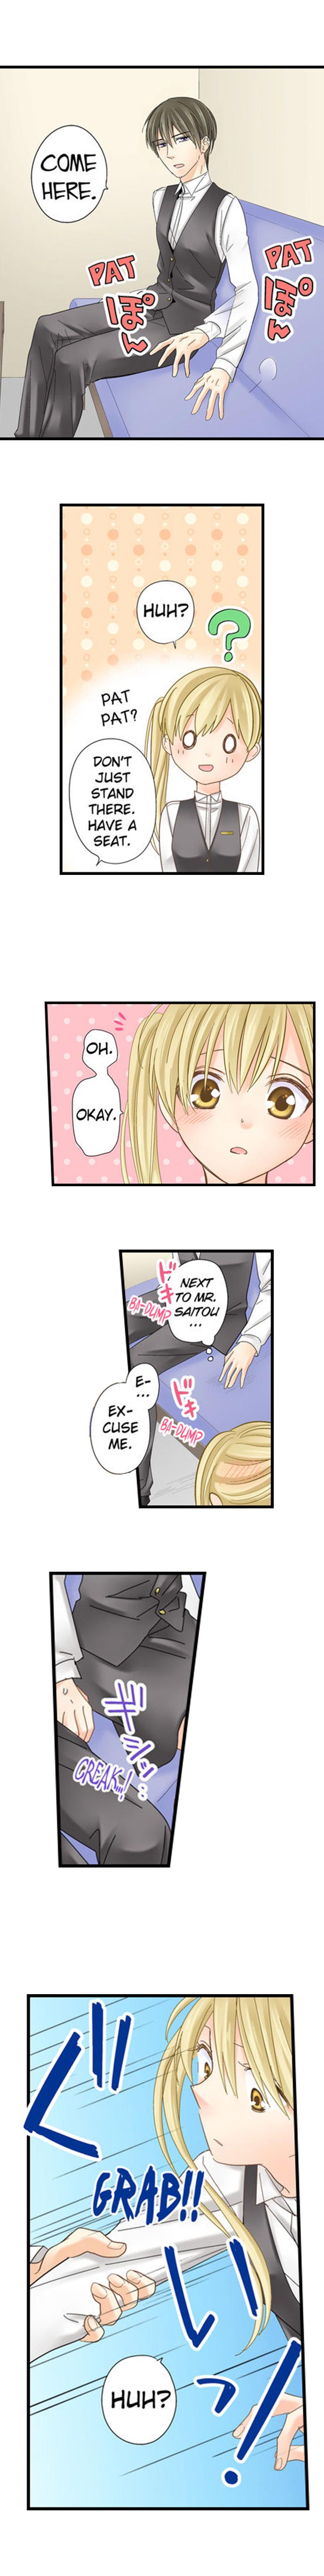 Running a Love Hotel with My Math Teacher - Chapter 10 Page 9